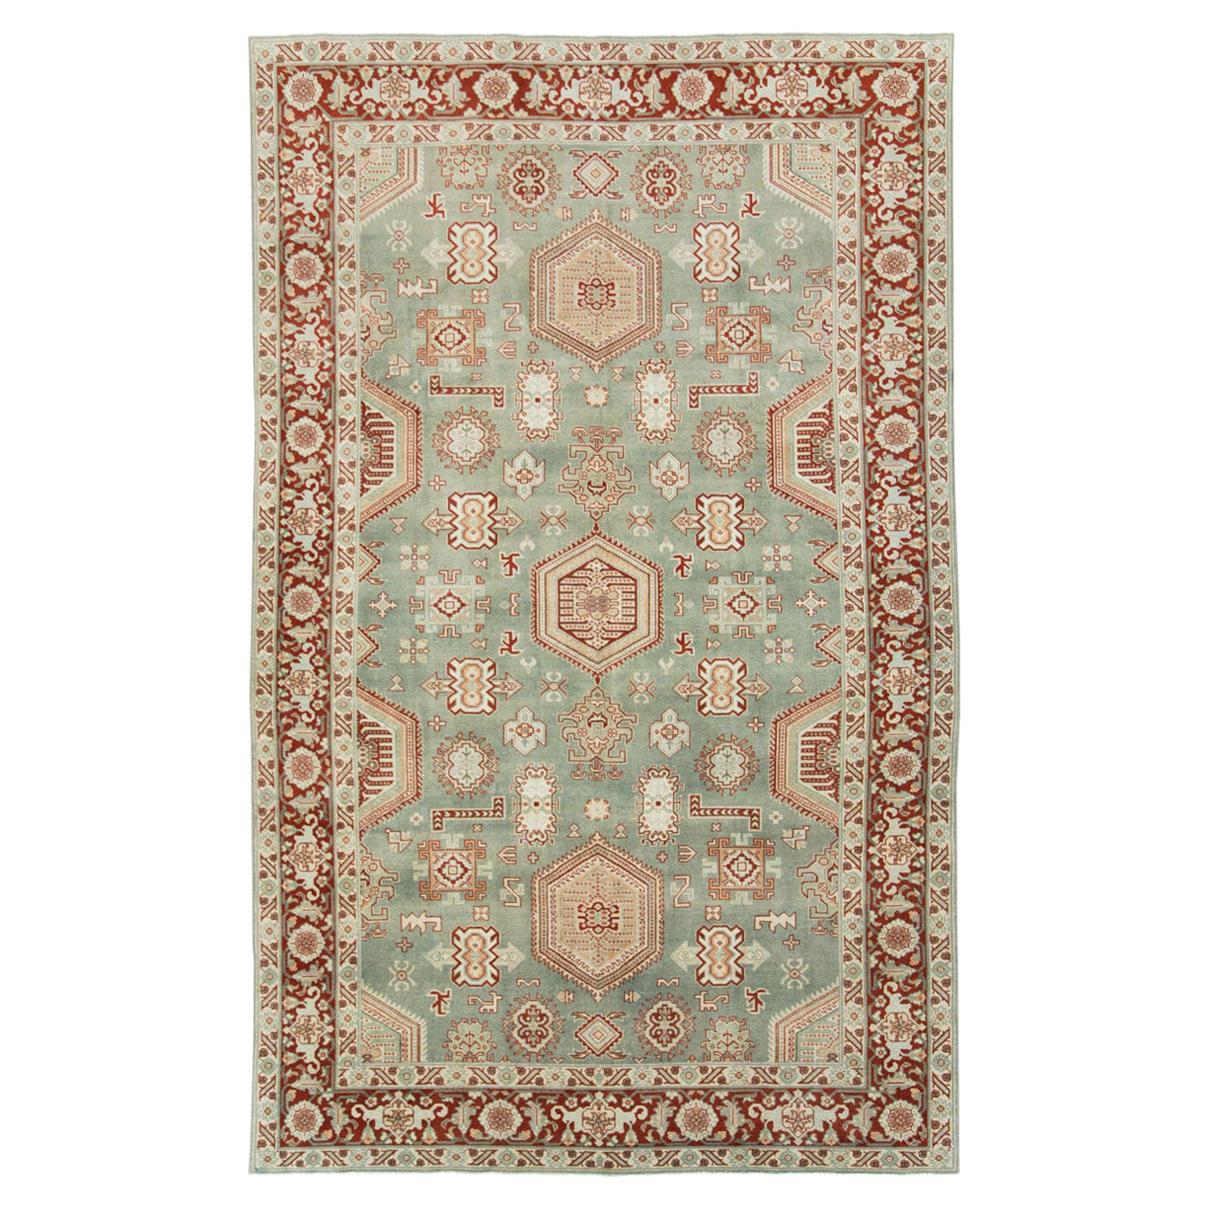 Mid-20th Century Handmade Persian Tabriz Accent Rug in Green and Rust Red For Sale